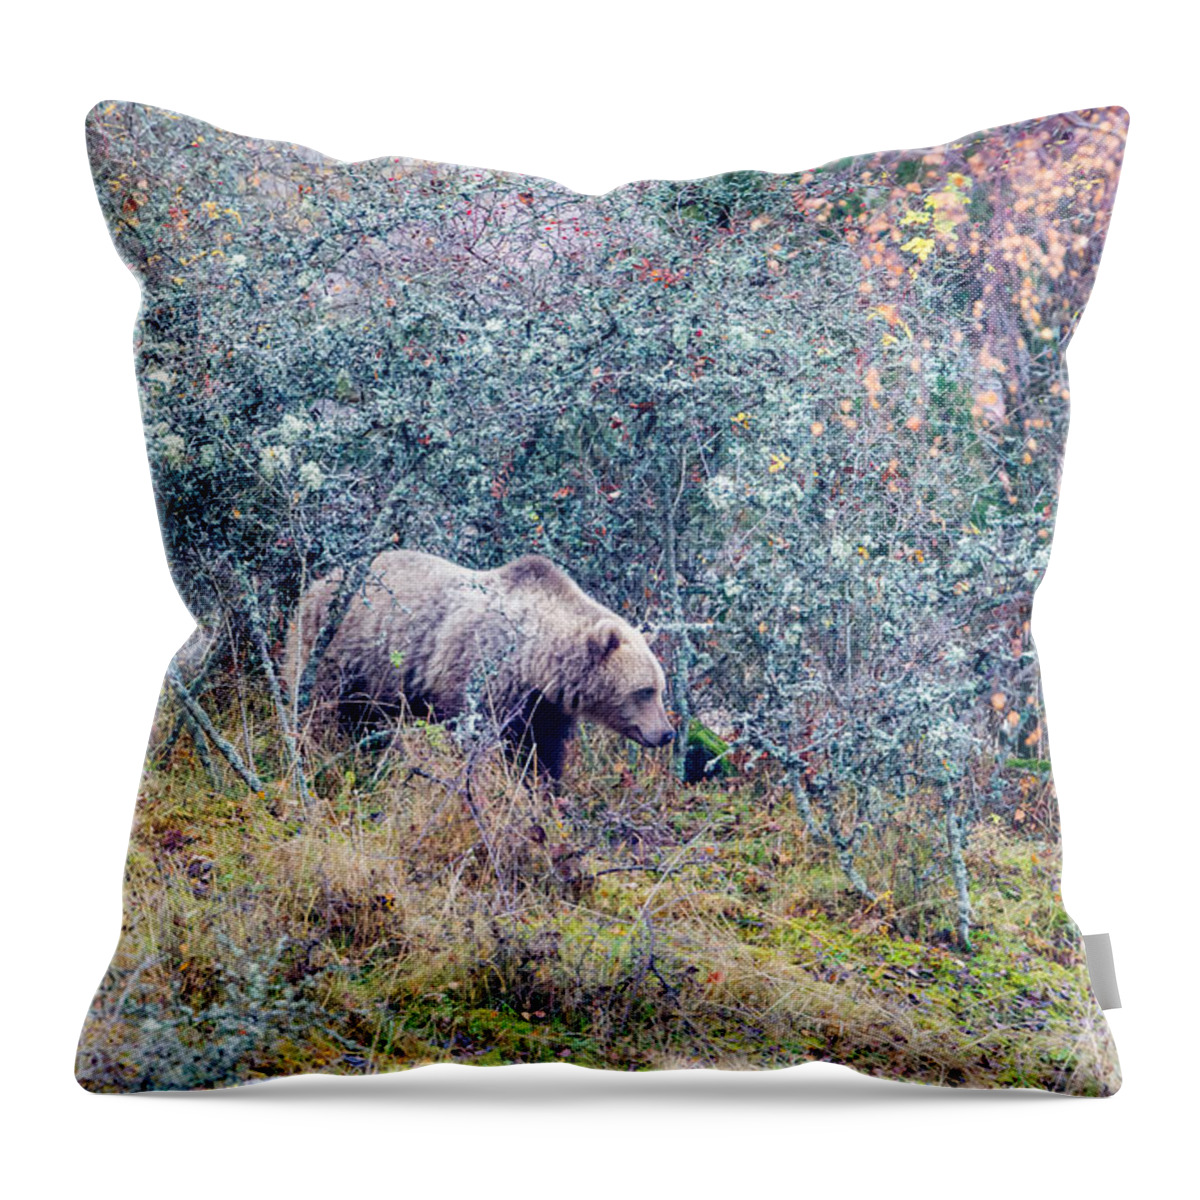 Bear Throw Pillow featuring the photograph Listening Bear by Torbjorn Swenelius